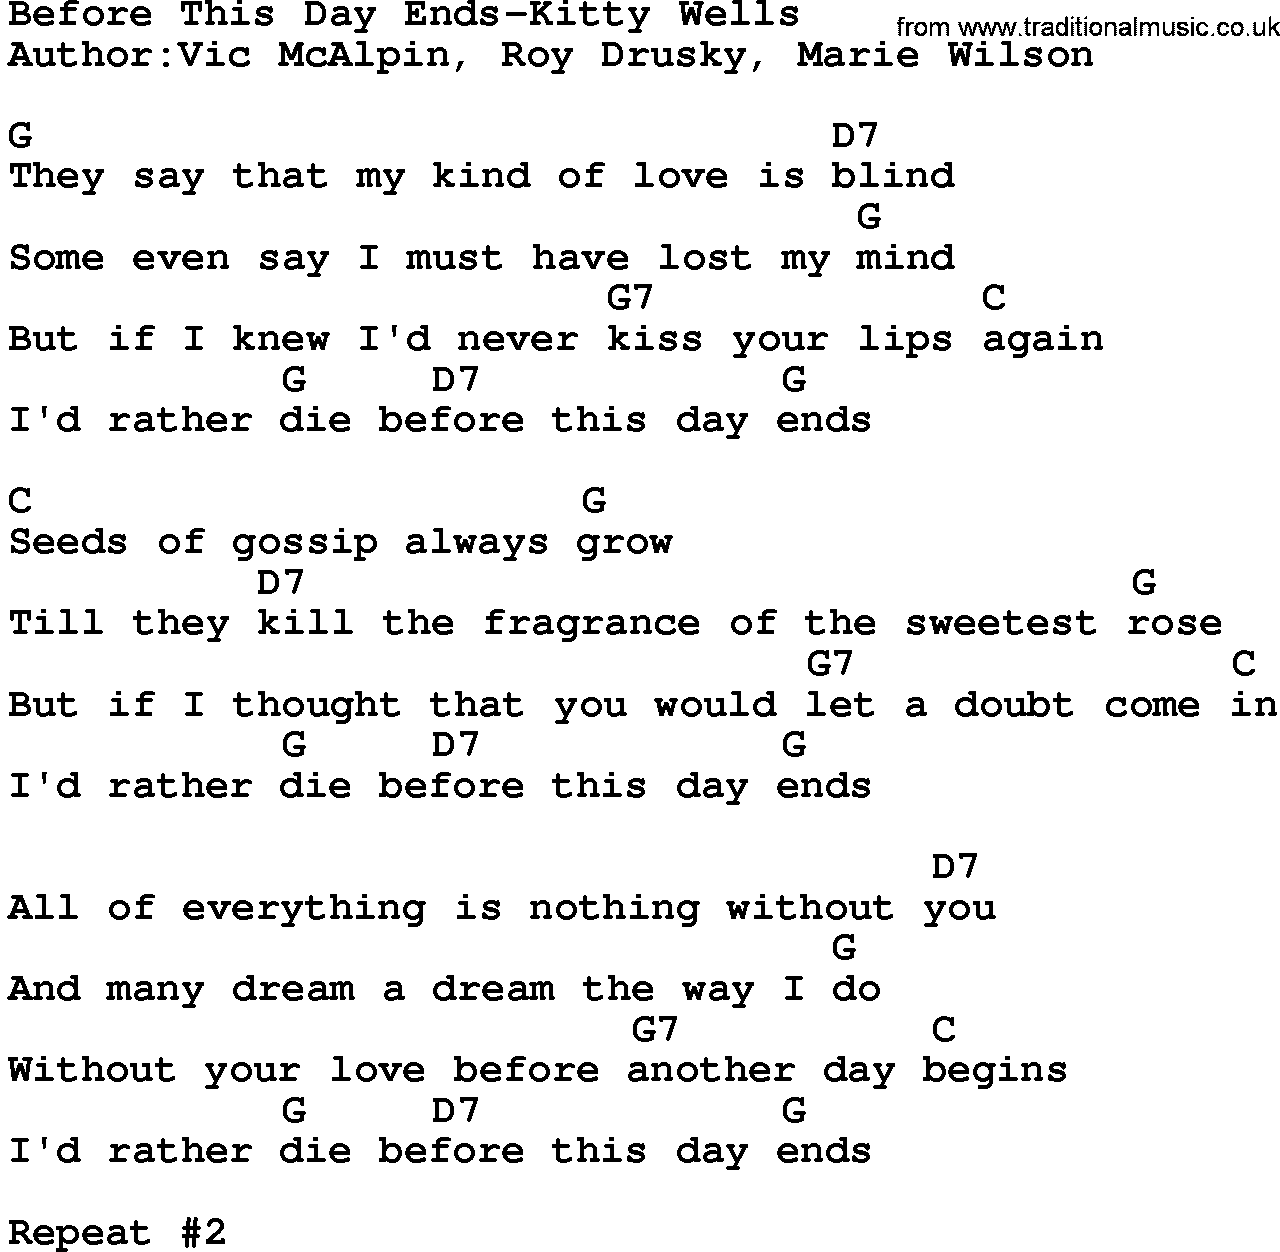 Country music song: Before This Day Ends-Kitty Wells lyrics and chords